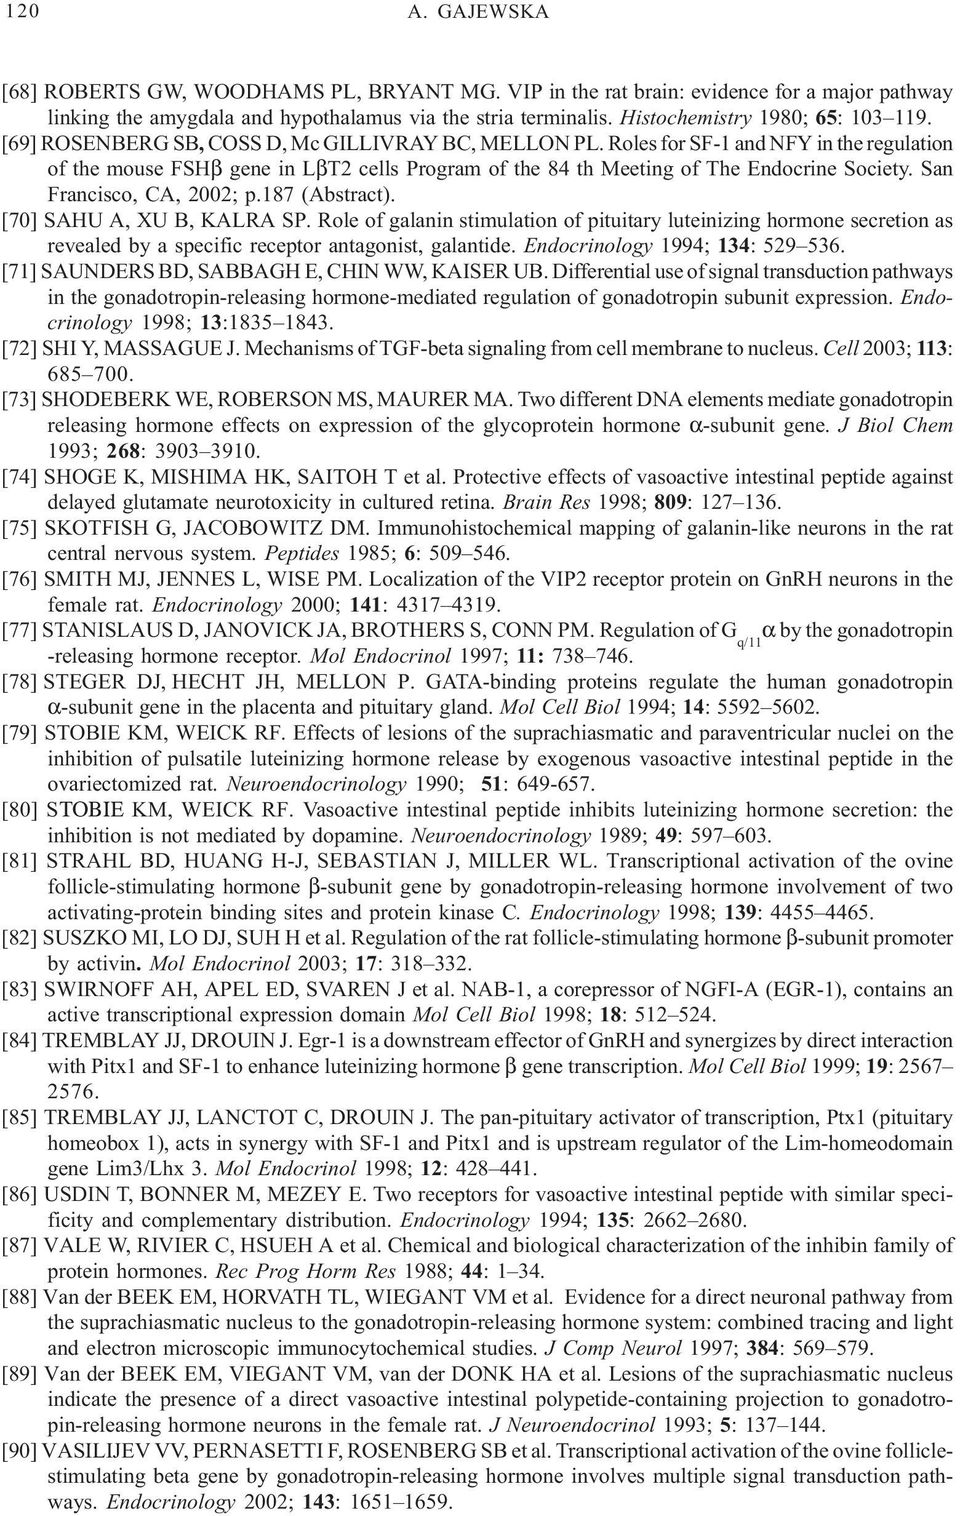 Roles for SF-1 and NFY in the regulation of the mouse FSHβ gene in LβT2 cells Program of the 84 th Meeting of The Endocrine Society. San Francisco, CA, 2002; p.187 (Abstract).